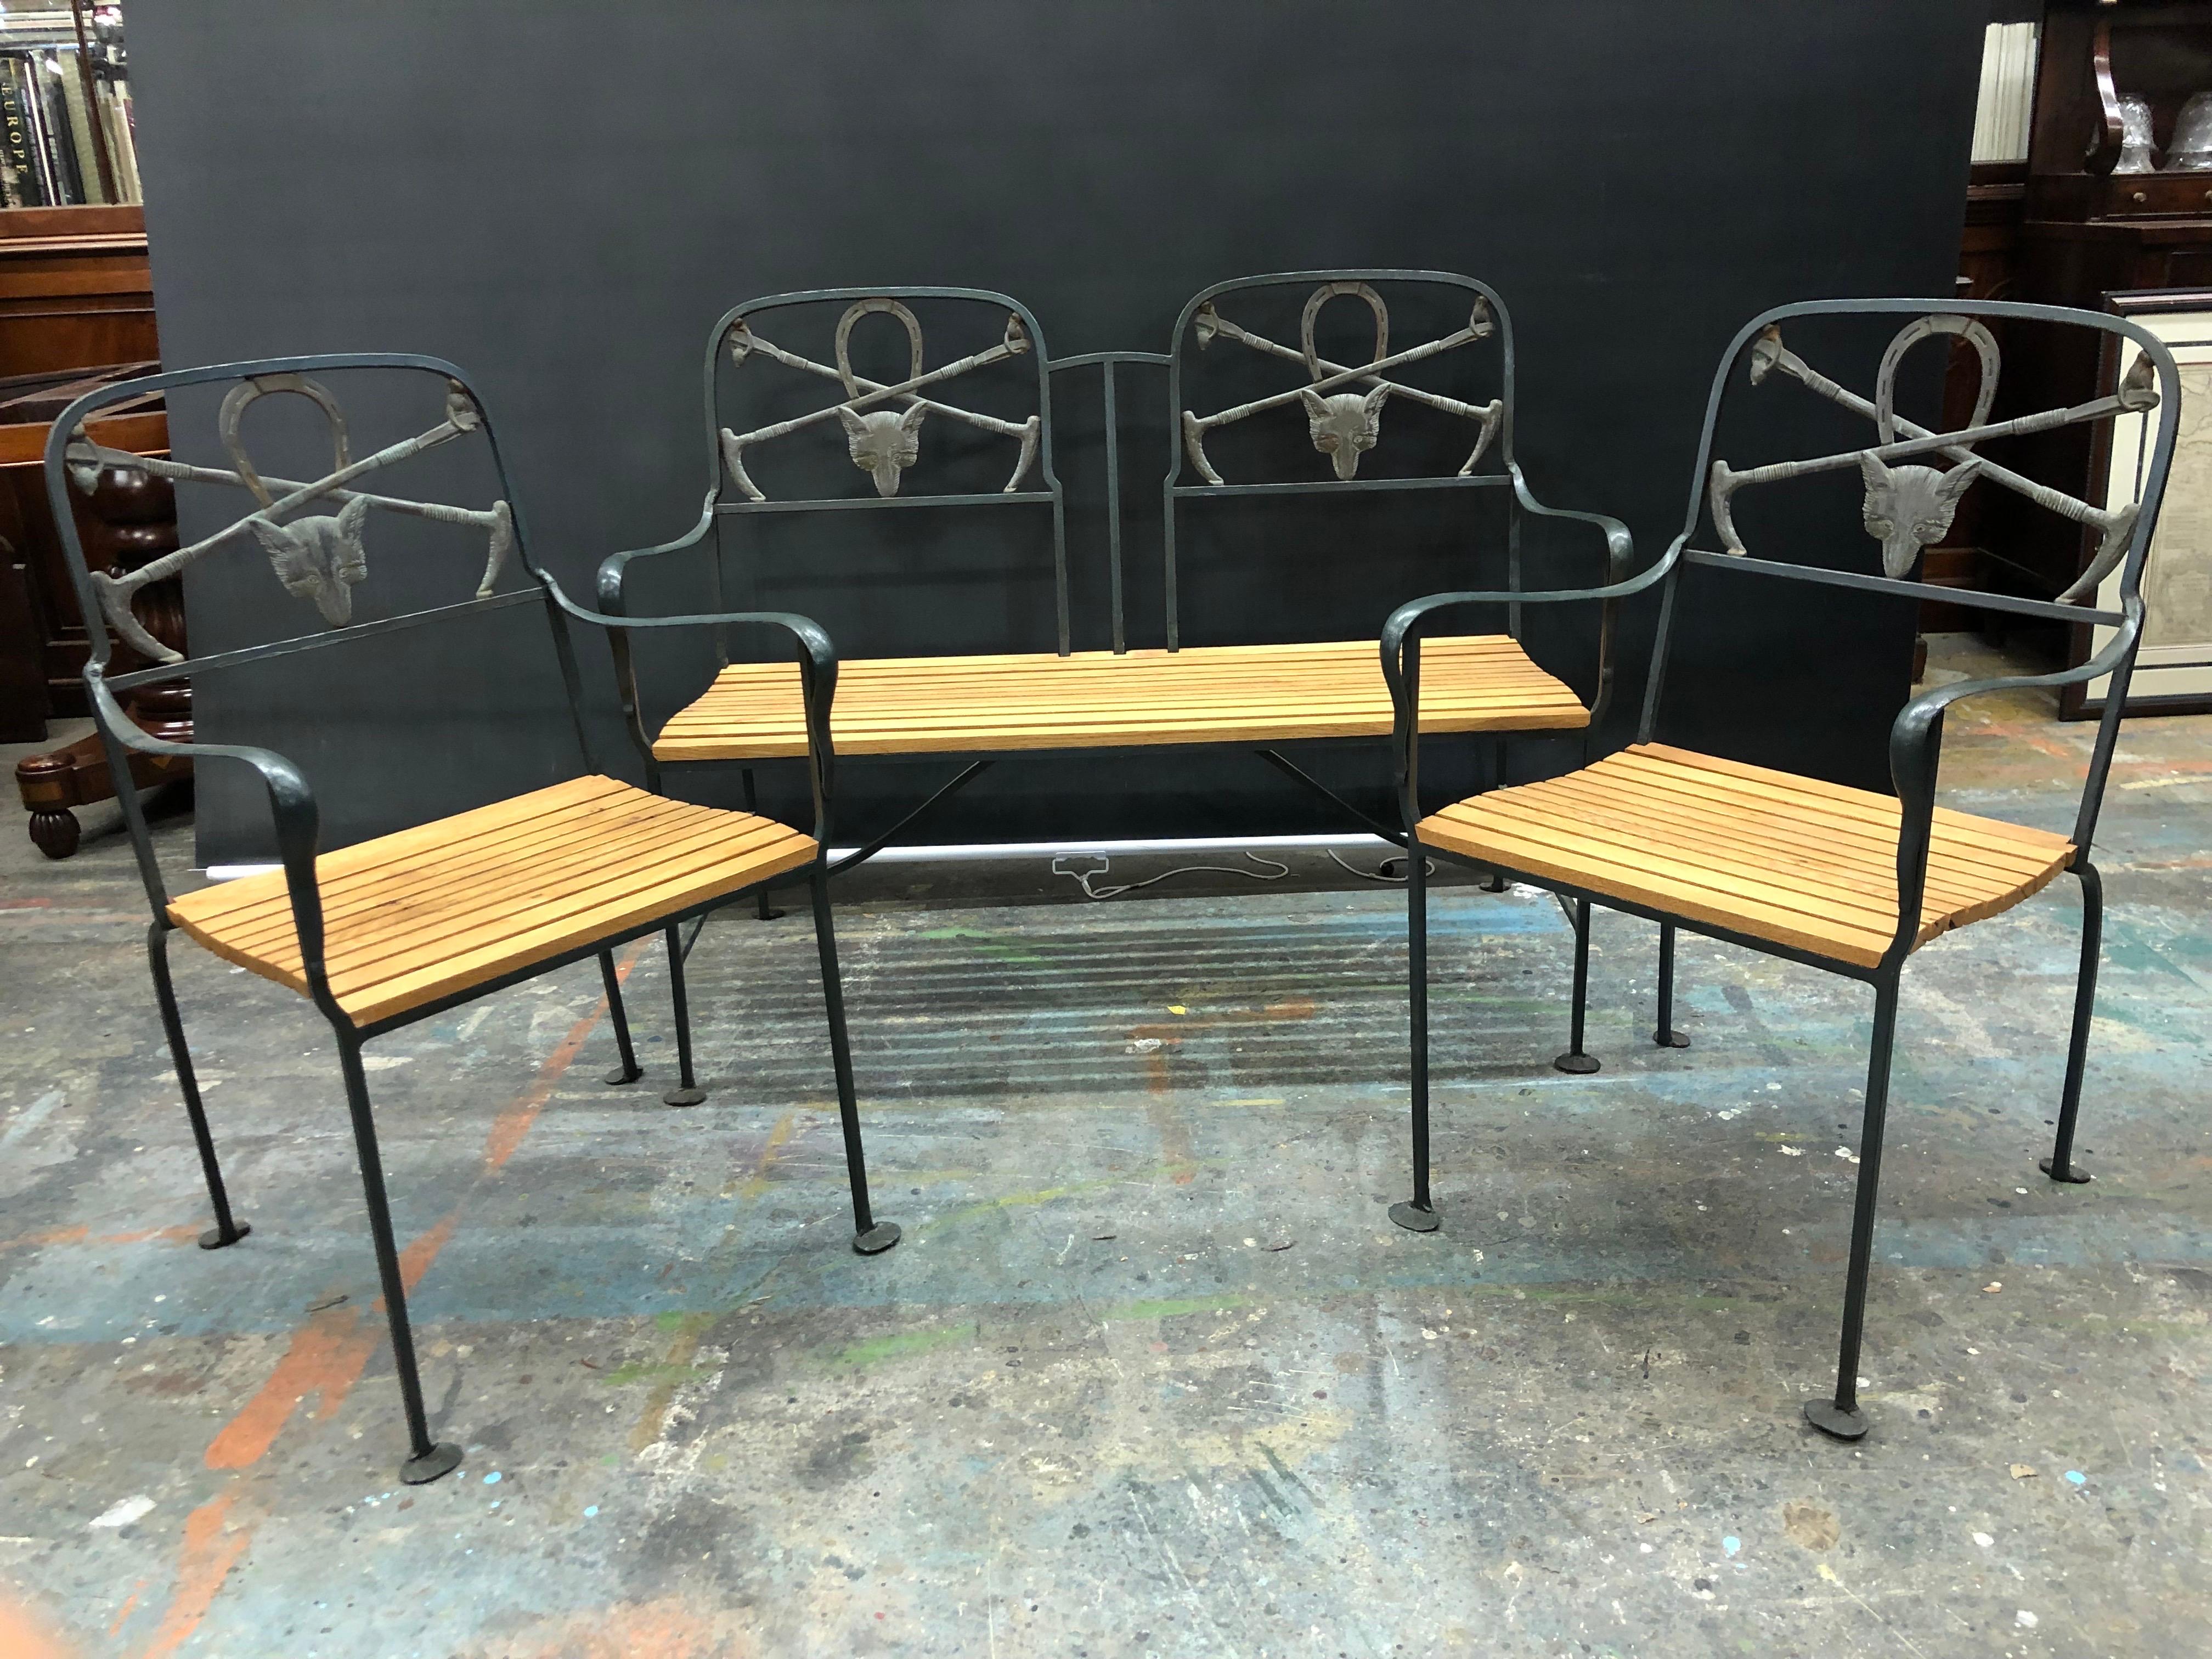 This English Regency hand wrought iron and brass fox three piece garden set has oak plank seats and was made in the early 20th Century. The Regency Wrought Iron Bench has a double panel back with fine cast brass Fox Heads below a Horse Shoe in the